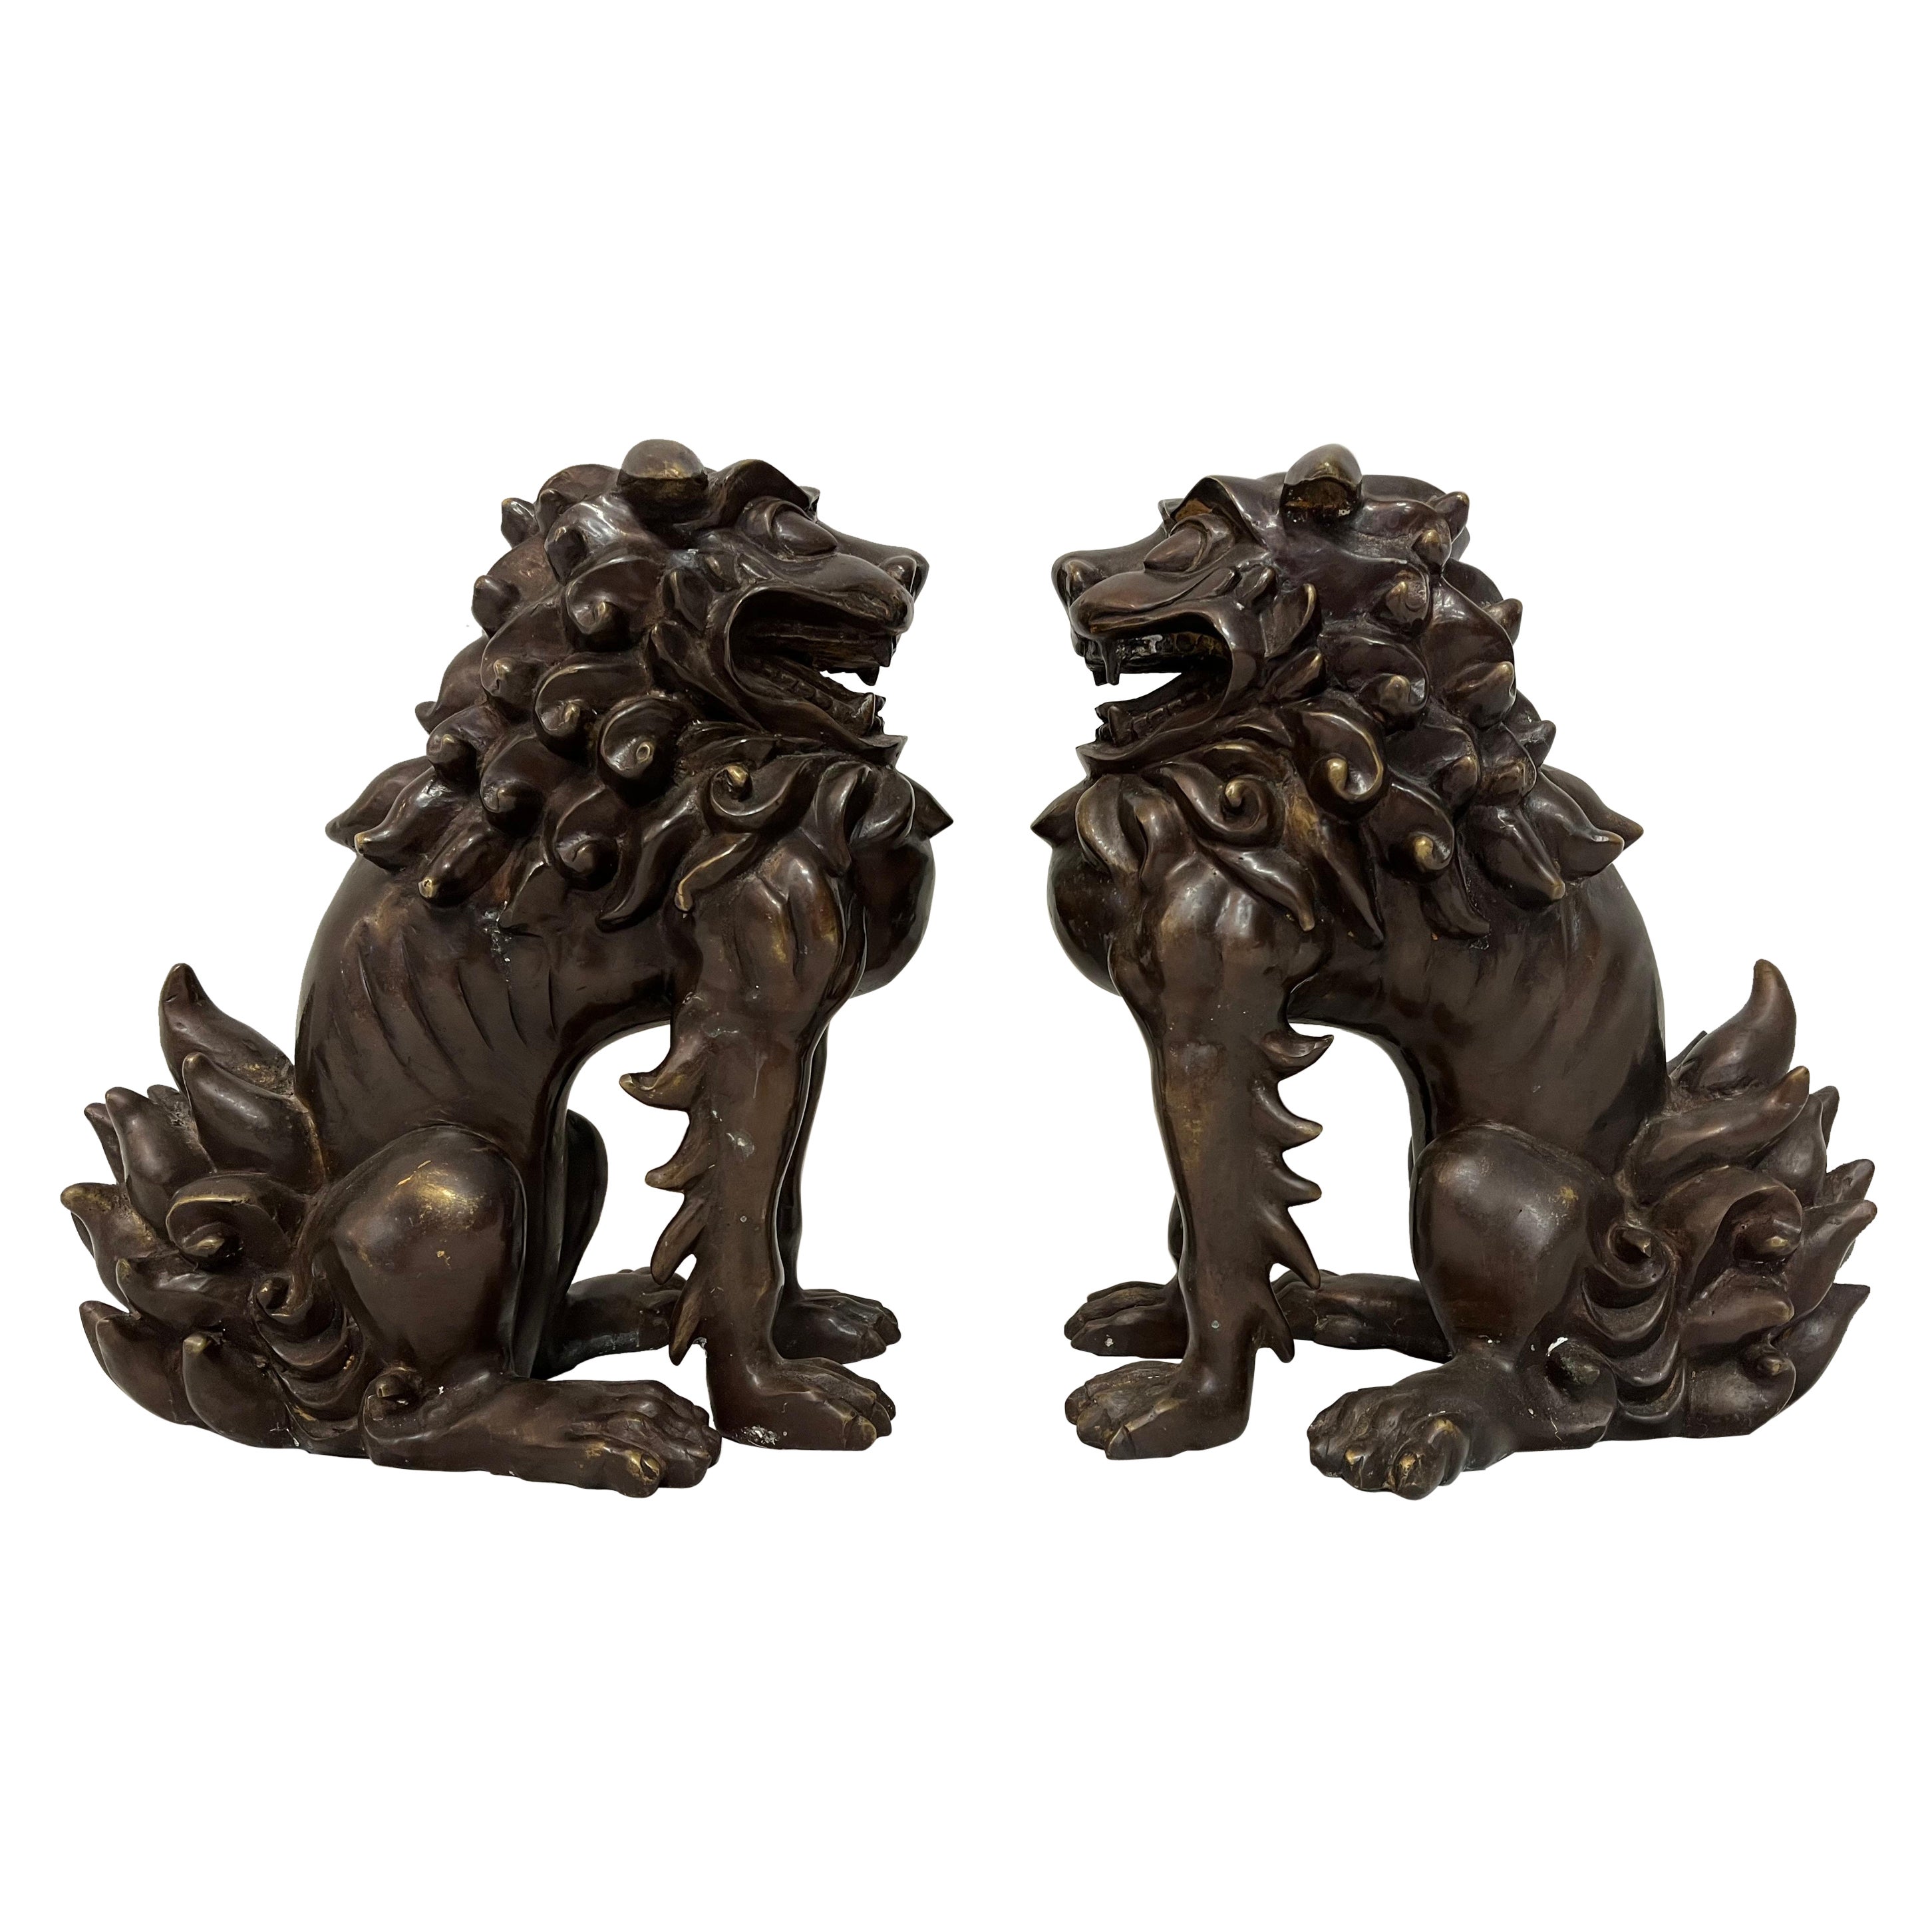 Large Pair of Bronze Lionized Shih Tzus Foo Dogs 20th Century Asian Sculptures For Sale